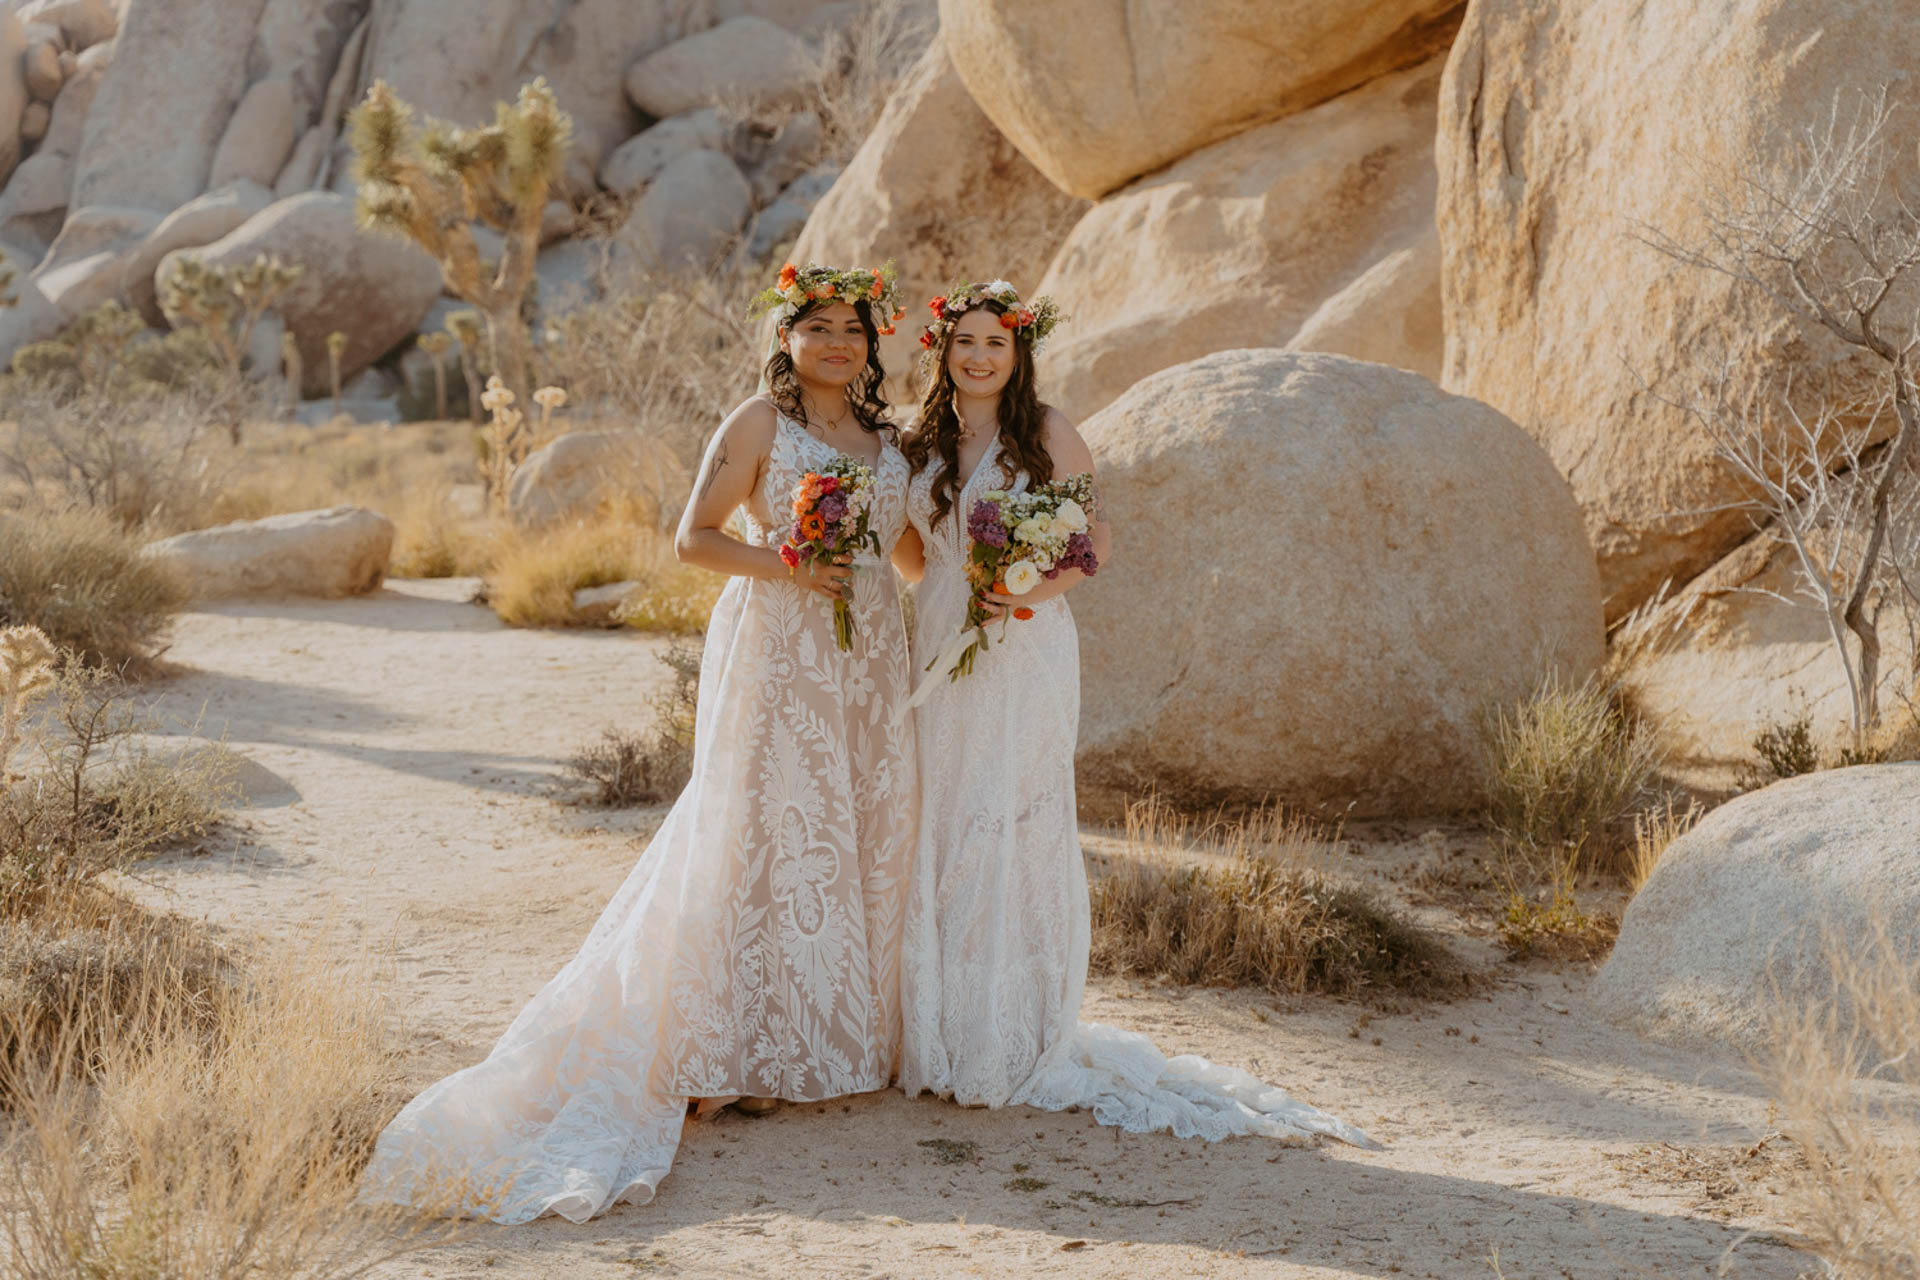 Brides posing for a photo in front of desert landscape — Joshua Tree Wedding Photographer